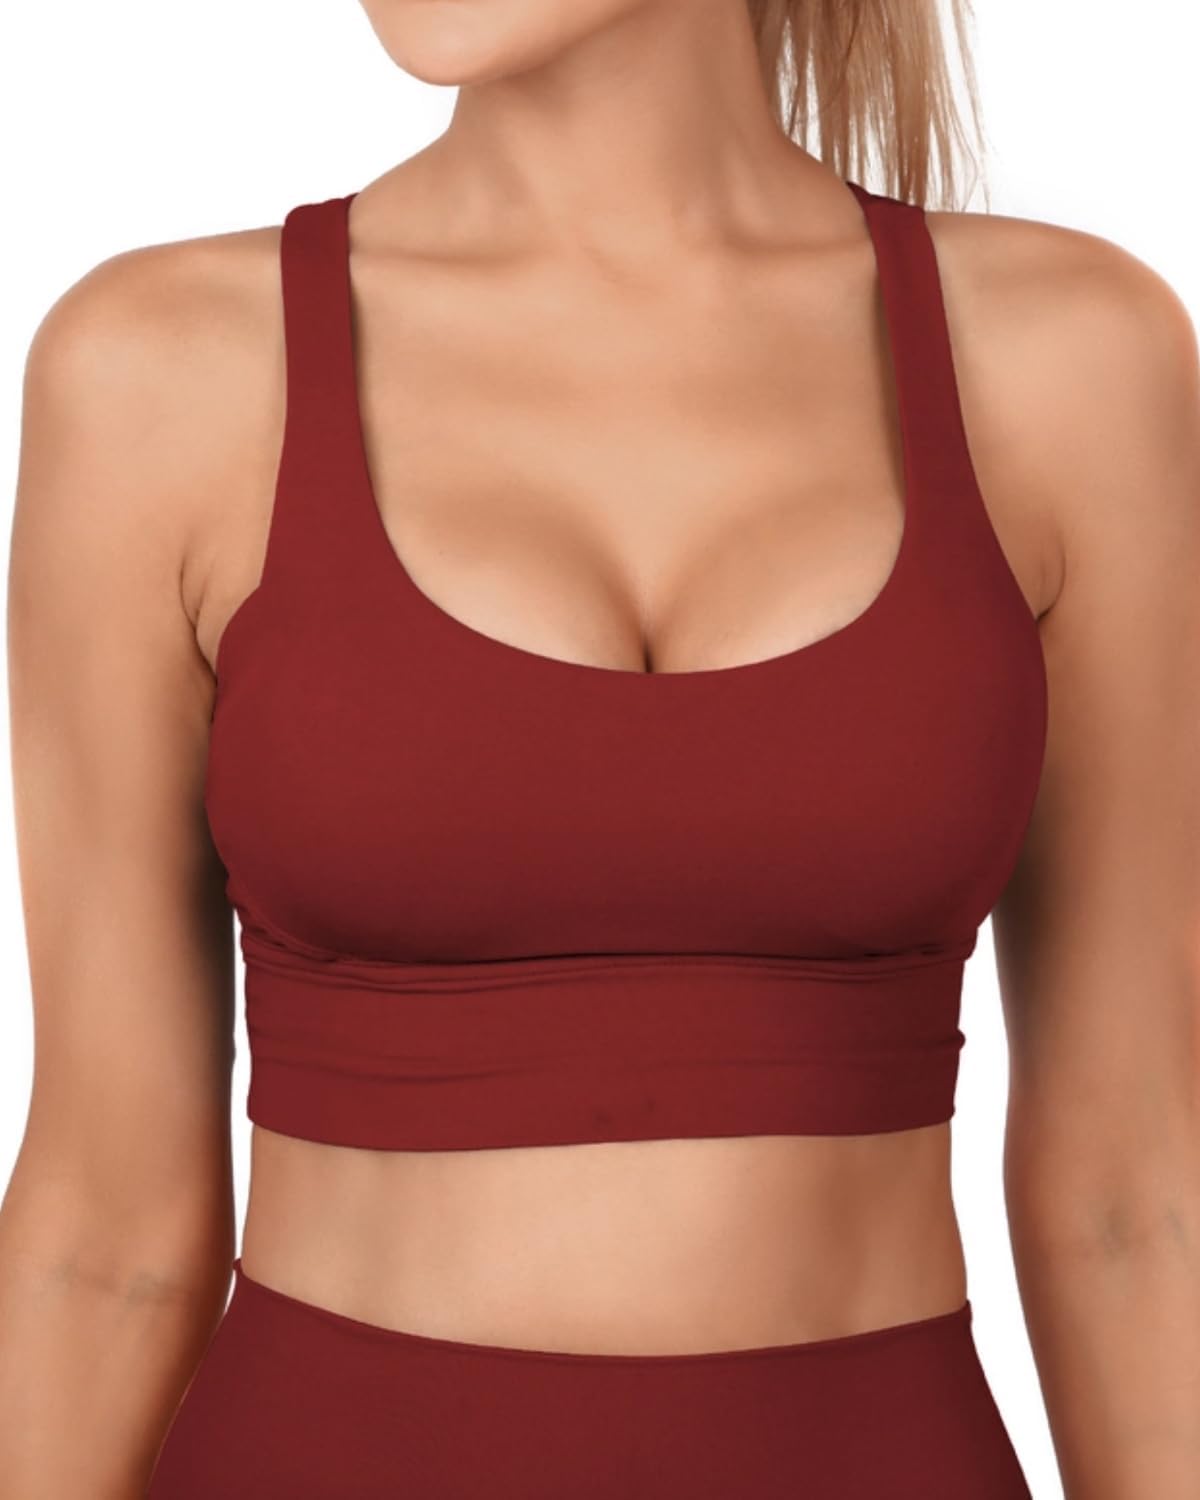 Grace Form Strappy Sports Bra for Women Padded High Impact Push Up Athletic  Runn